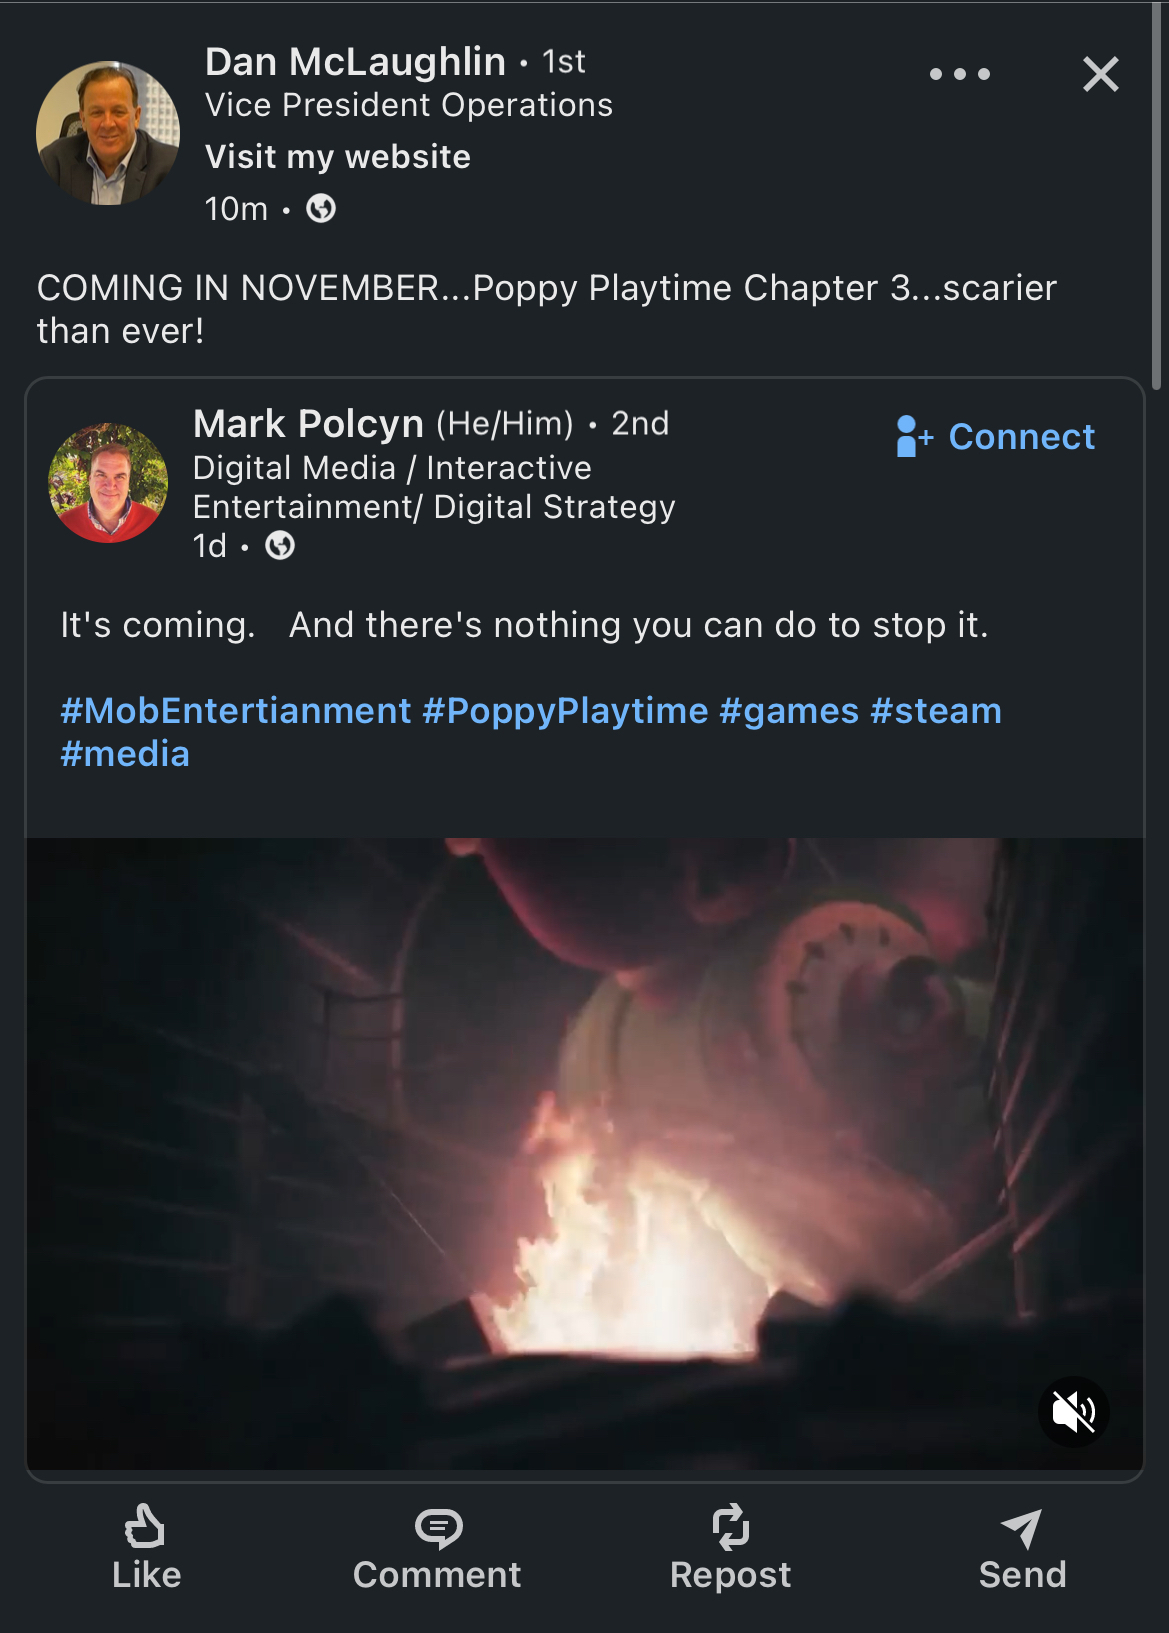 Poppy Playtime Chapter 3 expected release dates on mobile, new